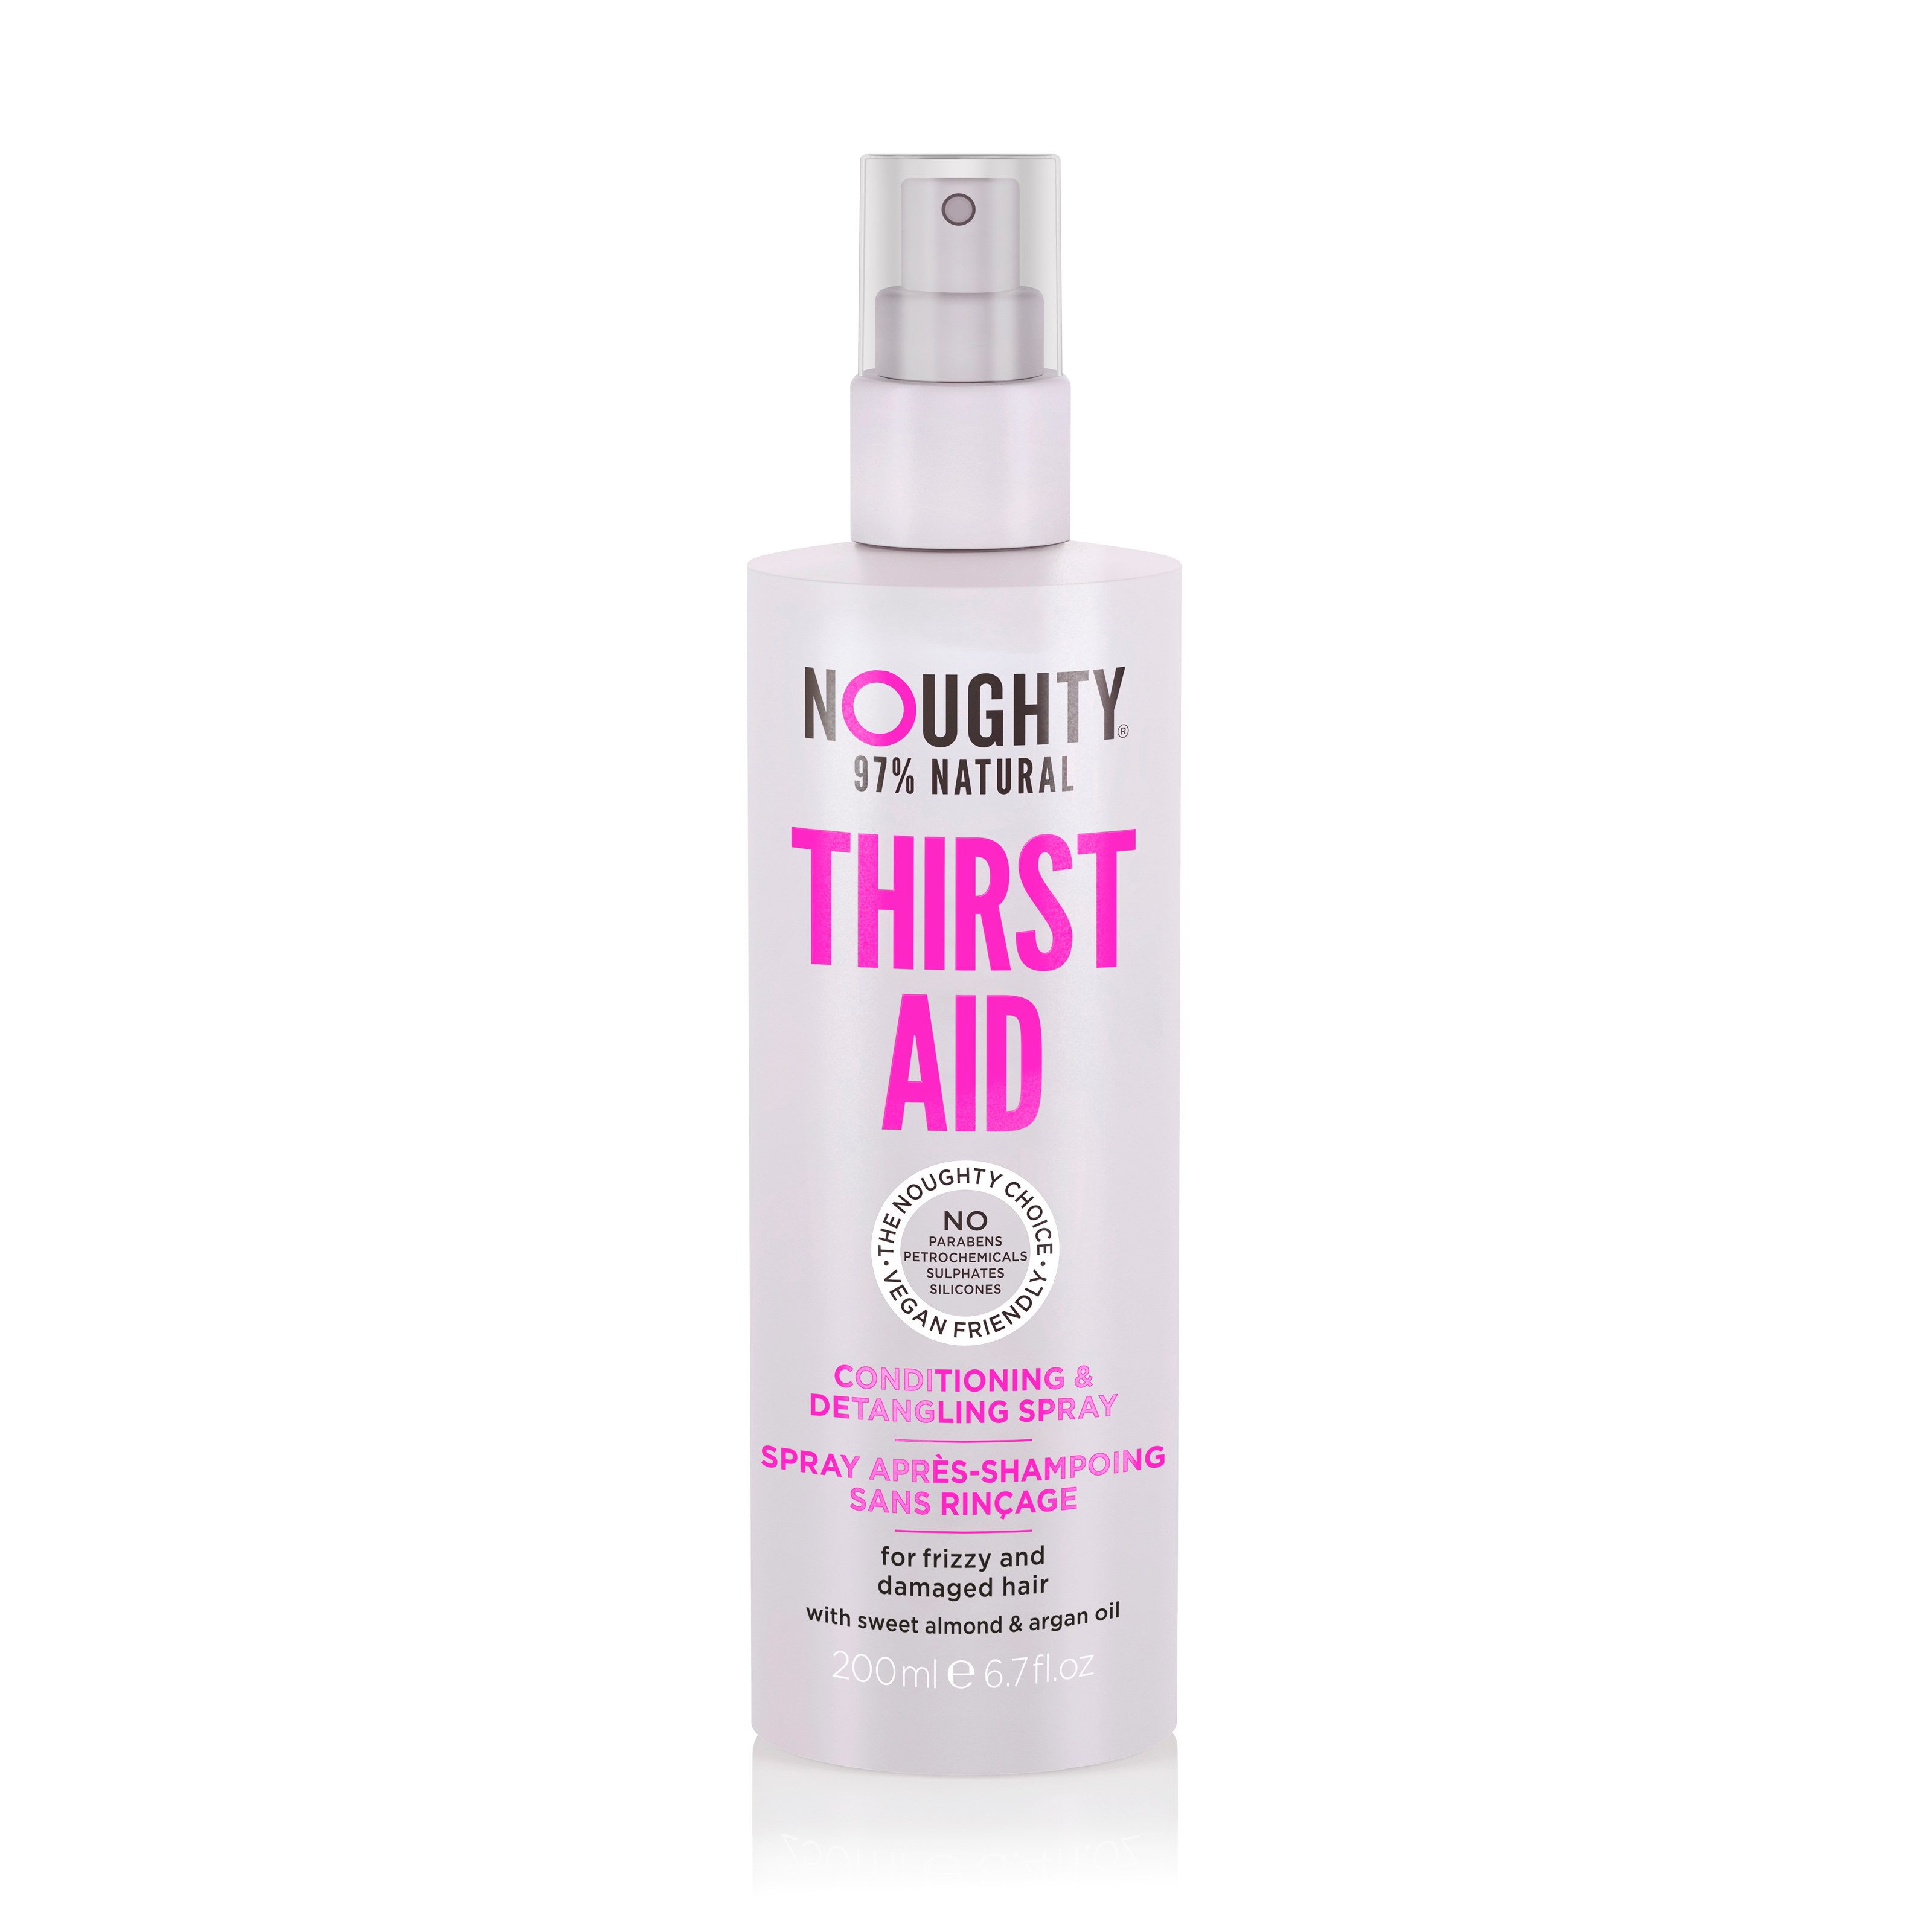 Noughty Thirst Aid Conditioning and Detangling Spray 200 ml